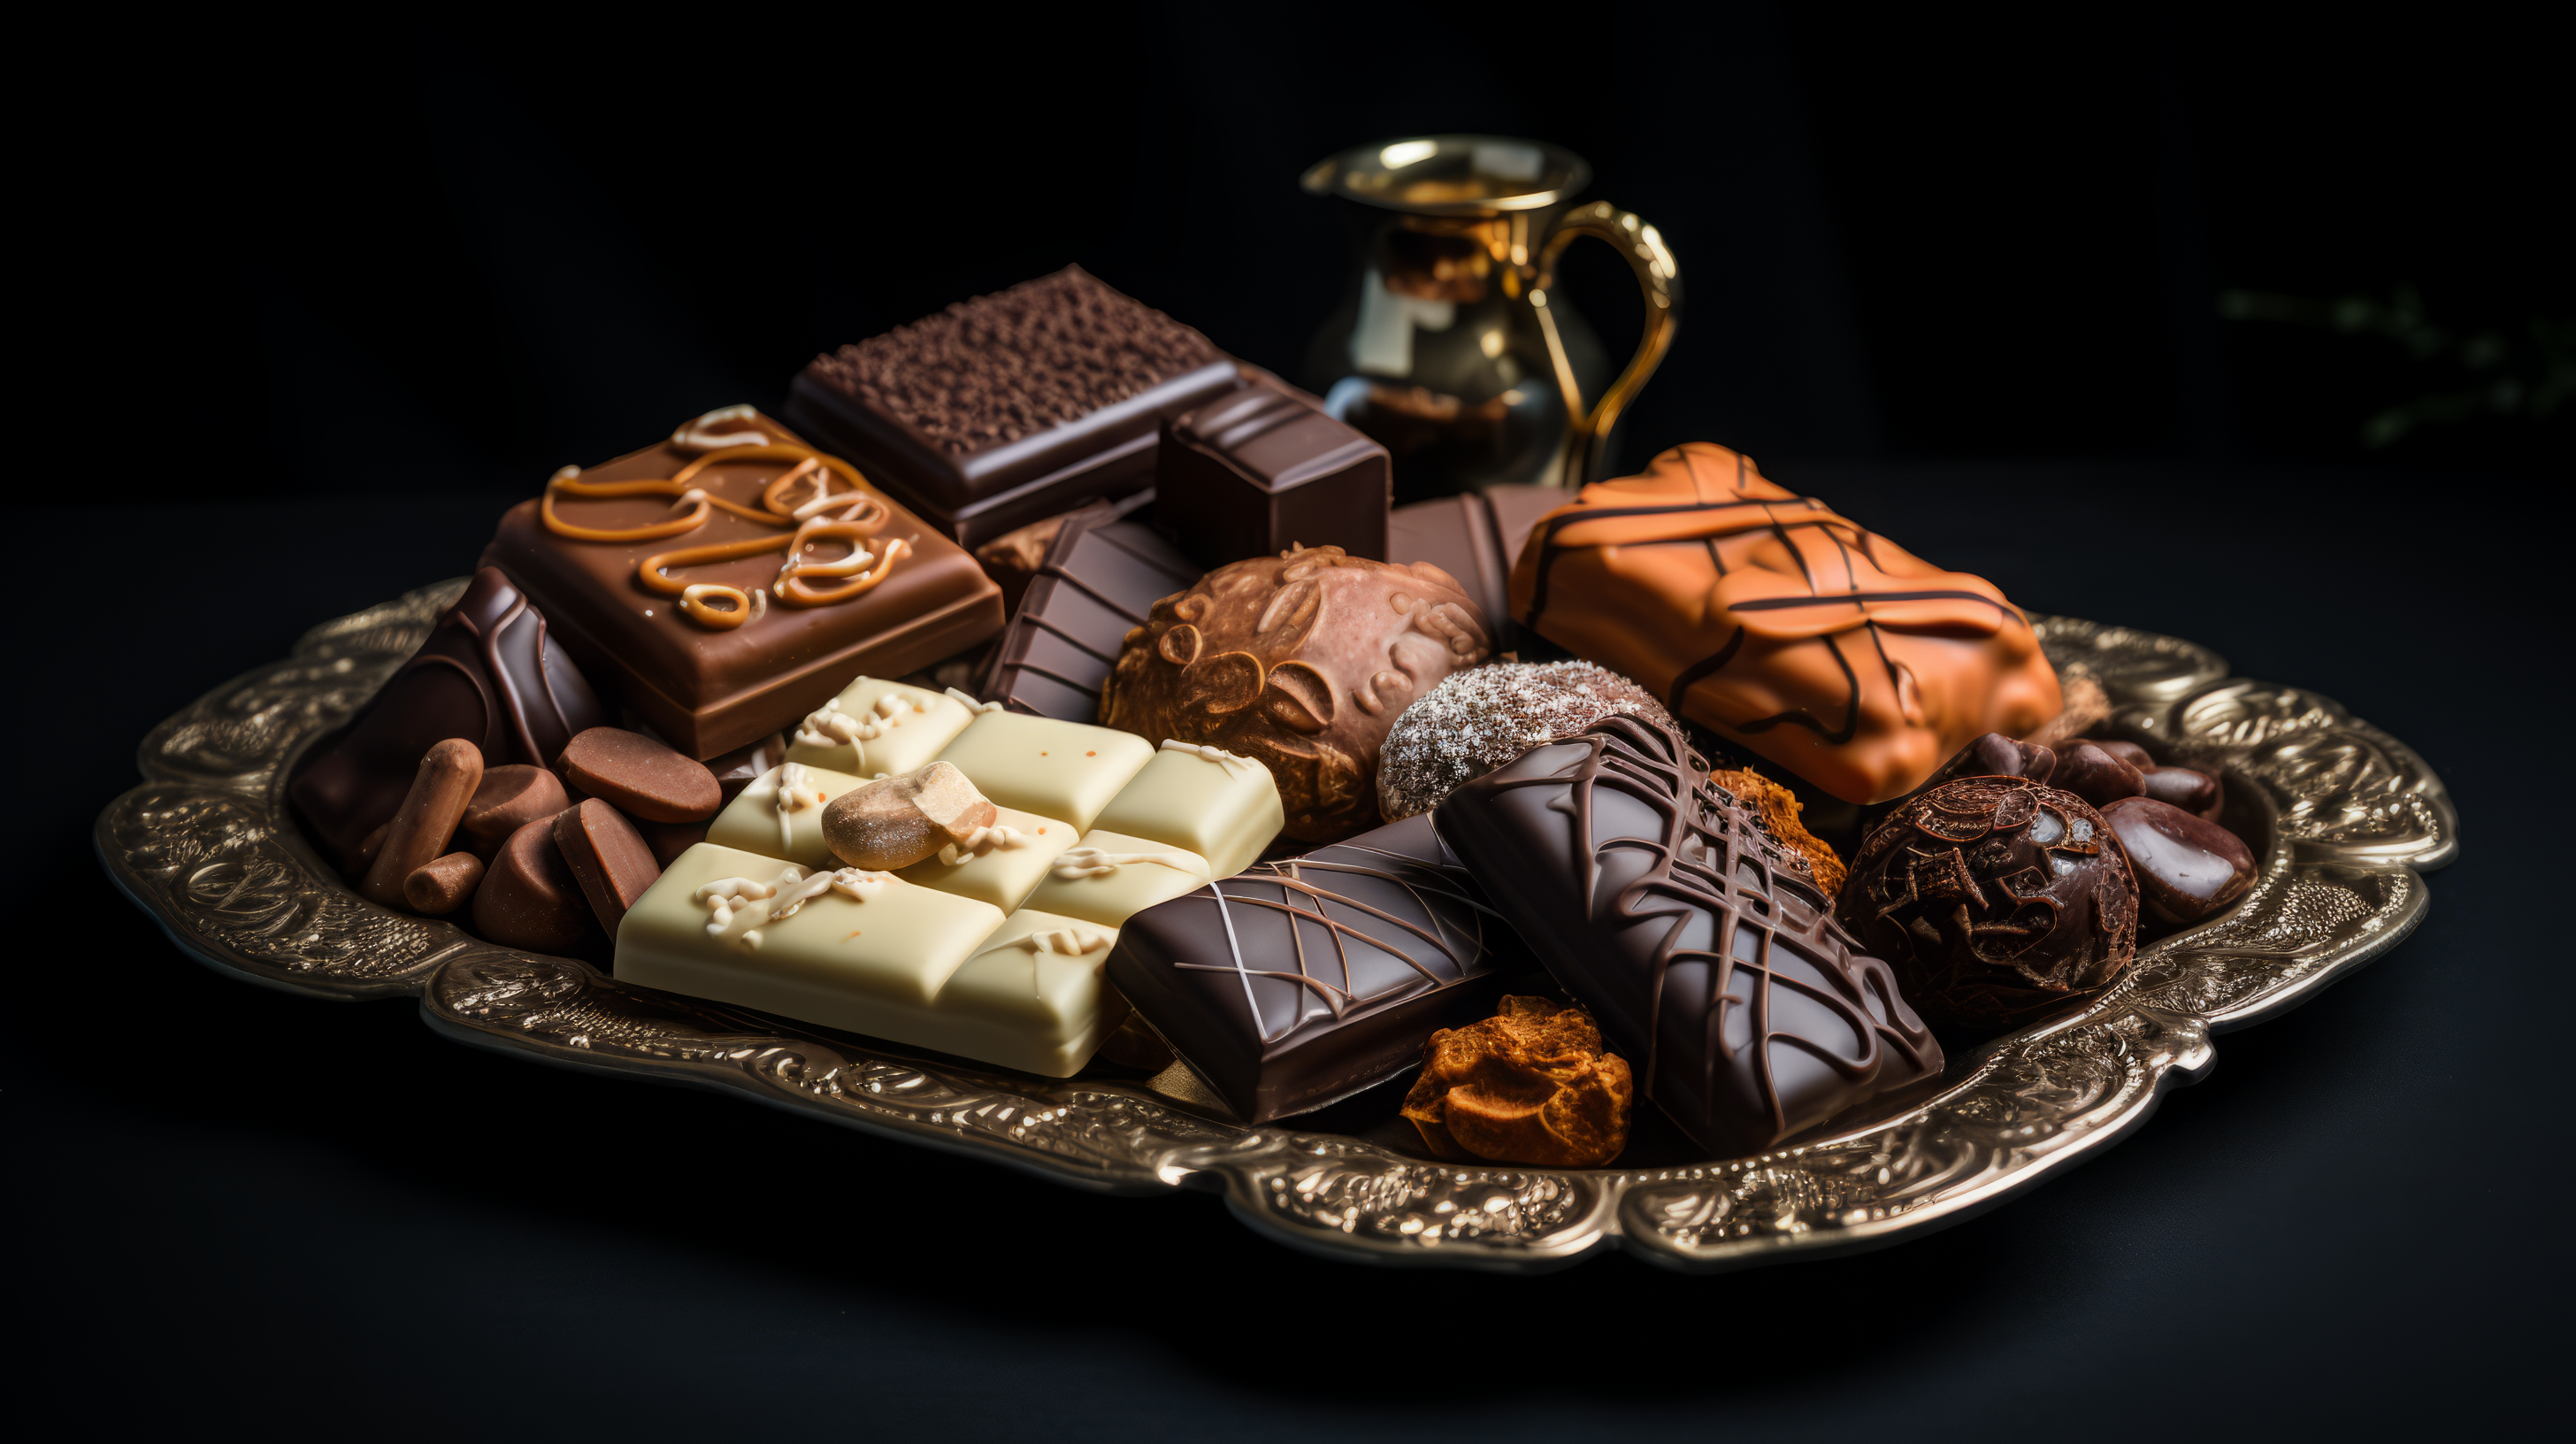 Food Chocolate HD Wallpaper | Background Image